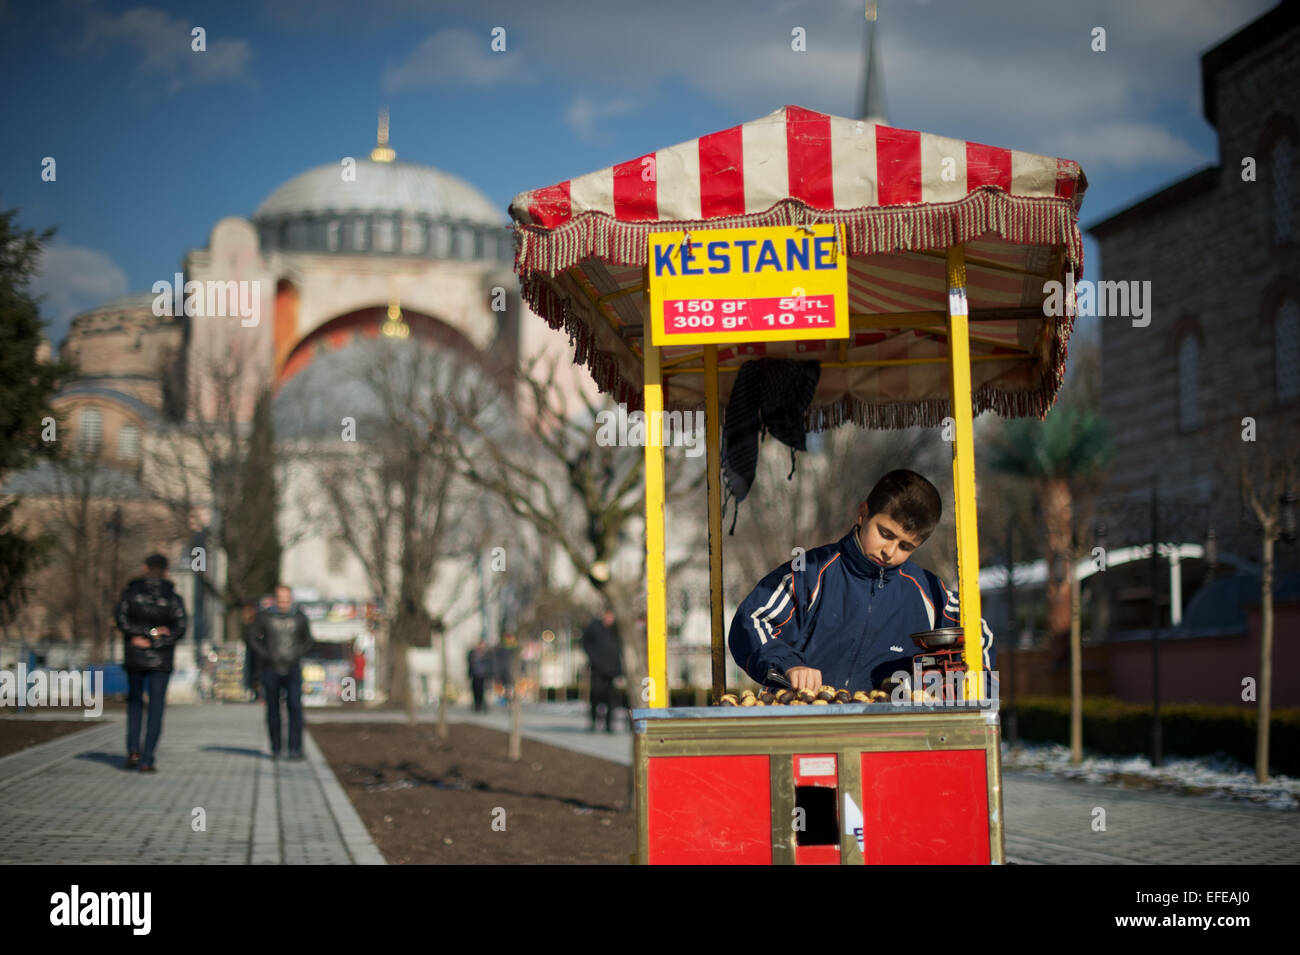 A young boy is pictured selling roast chestnuts as part of a photo essay on winter breaks in Istanbul, Turkey. Stock Photo